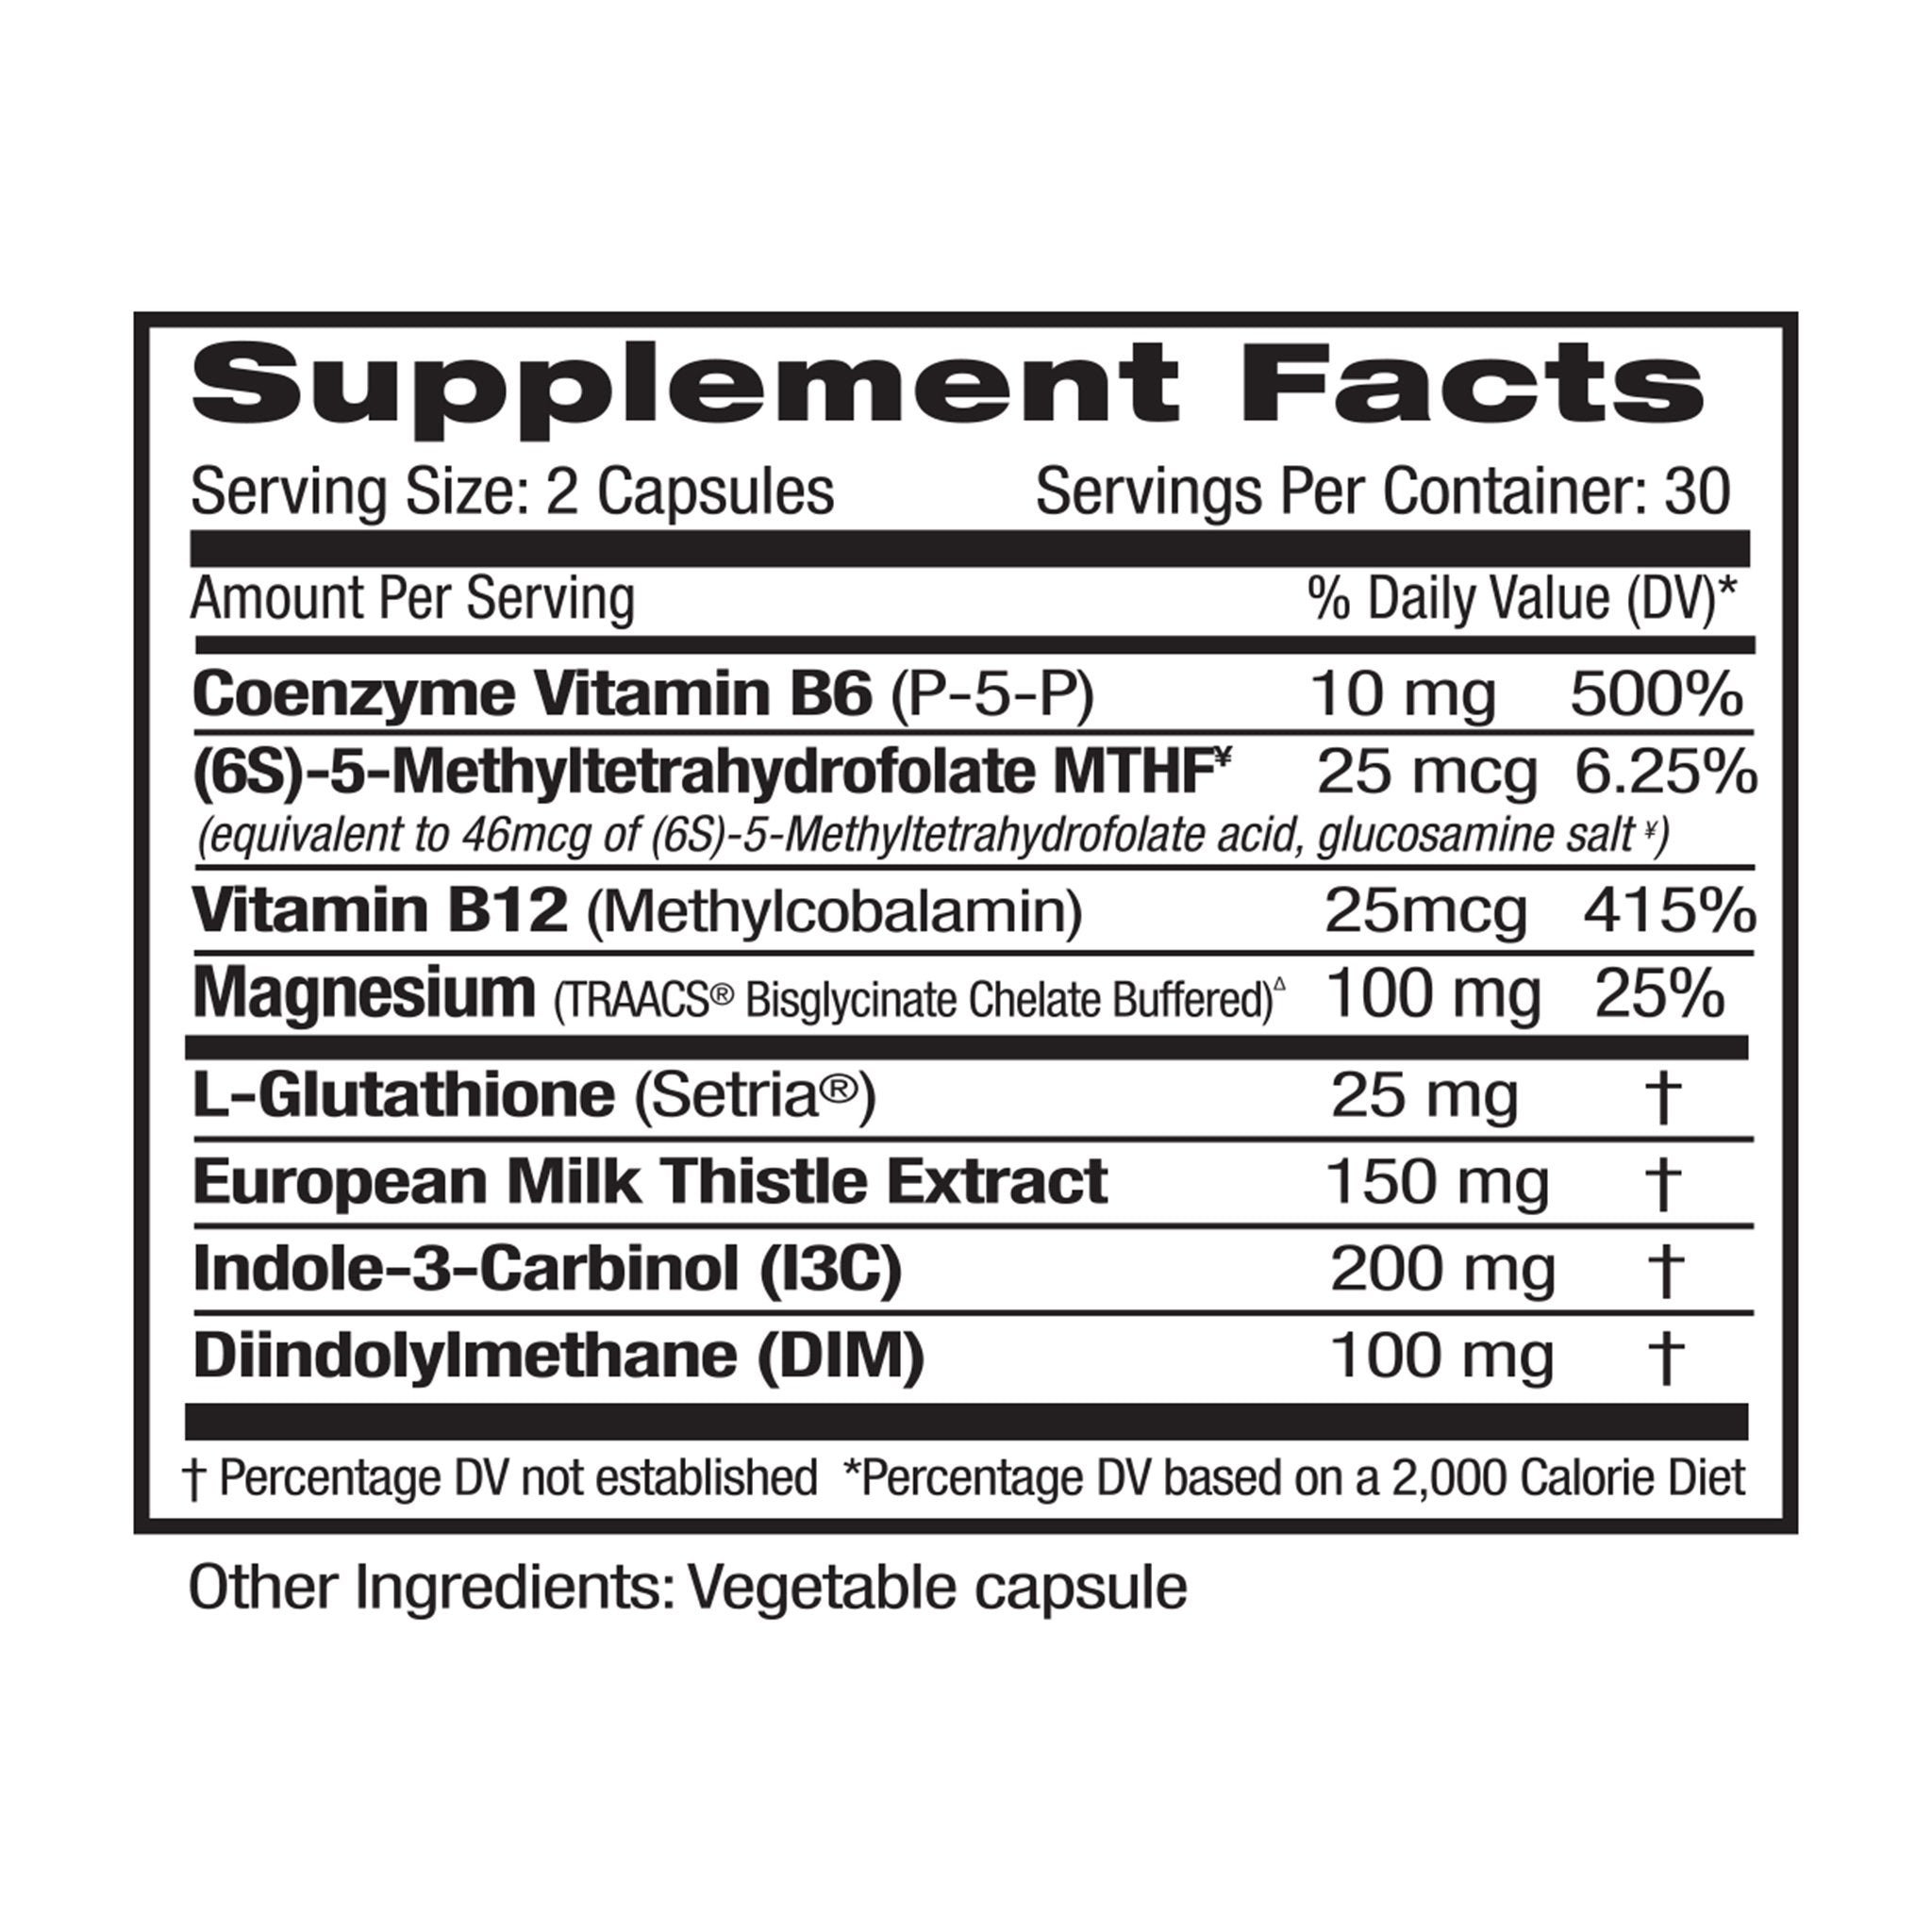 Supplement Facts for Estro Wellness